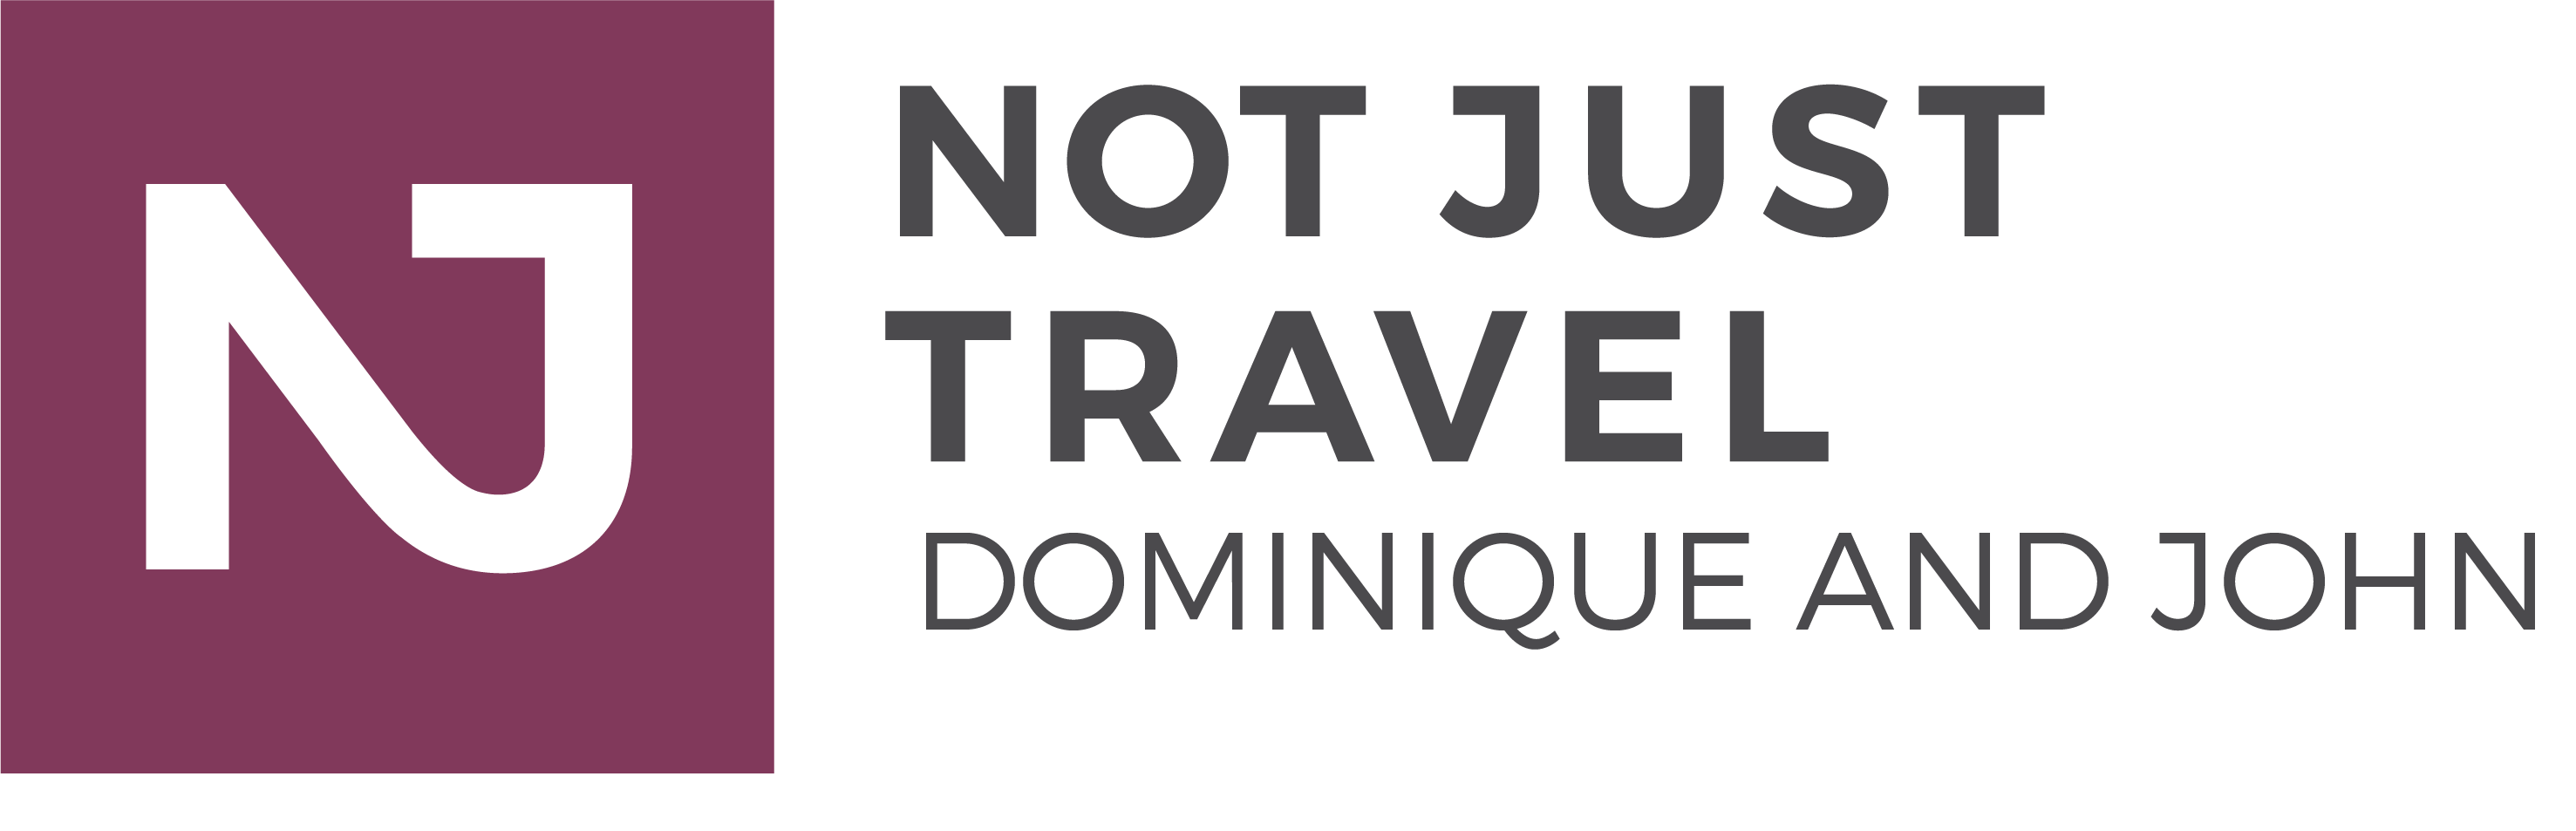 Not just Travel